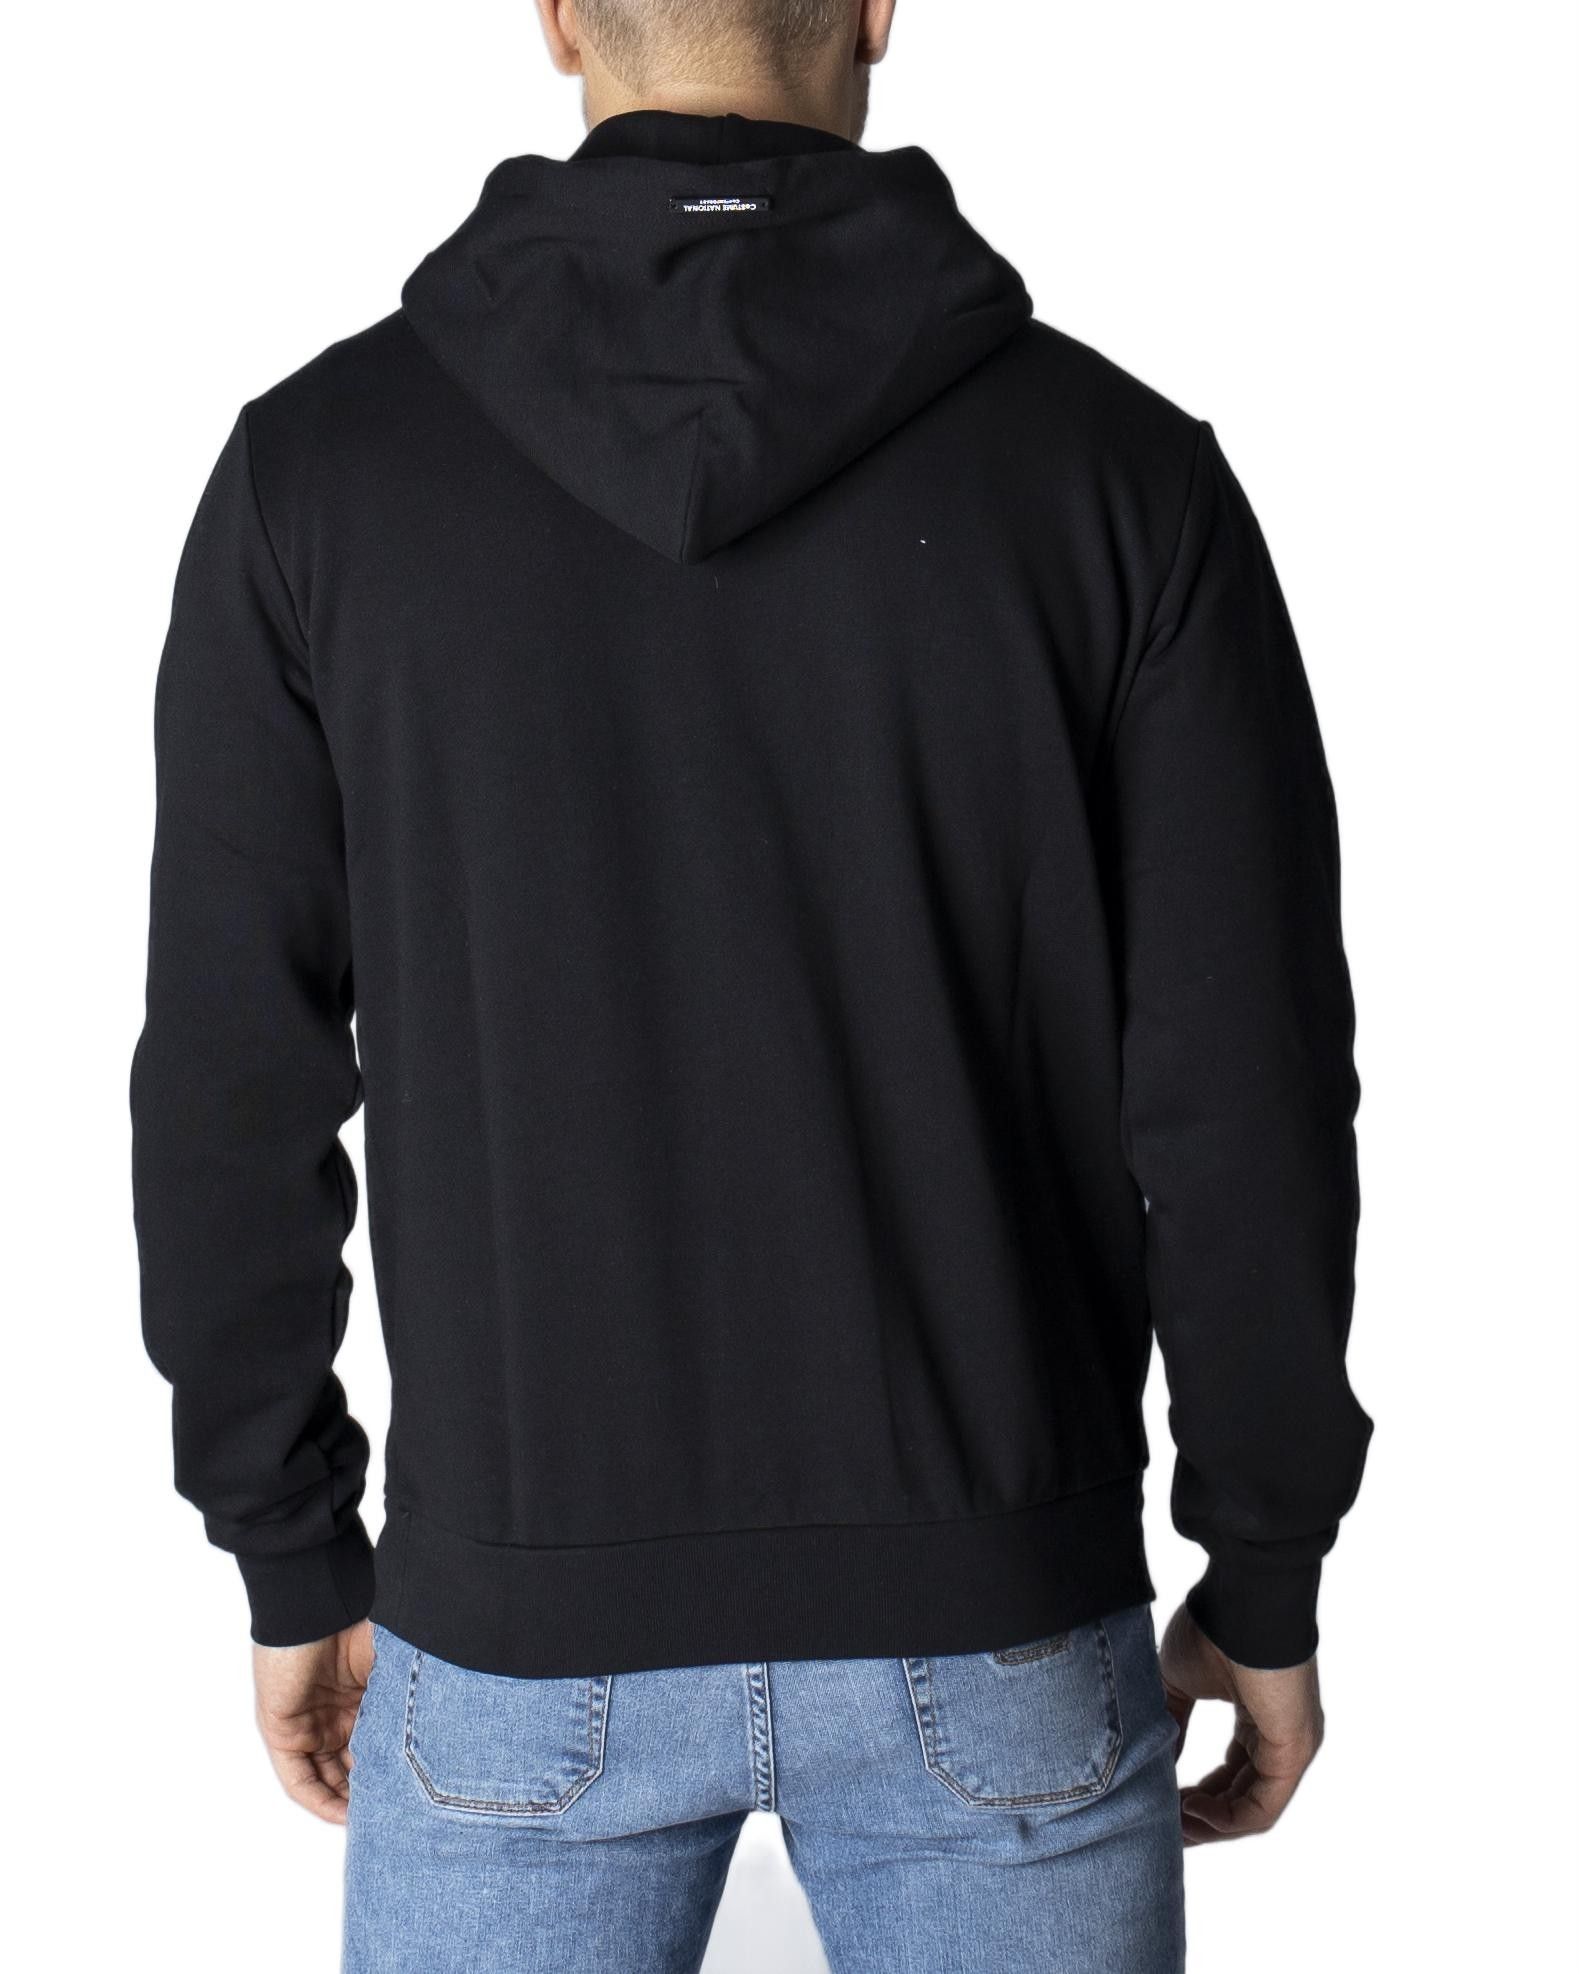 Brand: Costume National
Gender: Men
Type: Sweatshirts
Season: Spring/Summer

PRODUCT DETAIL
• Color: black
• Pattern: print
• Fastening: slip on
• Sleeves: long
• Collar: hood

COMPOSITION AND MATERIAL
• Composition: -100% cotton 
•  Washing: machine wash at 30°